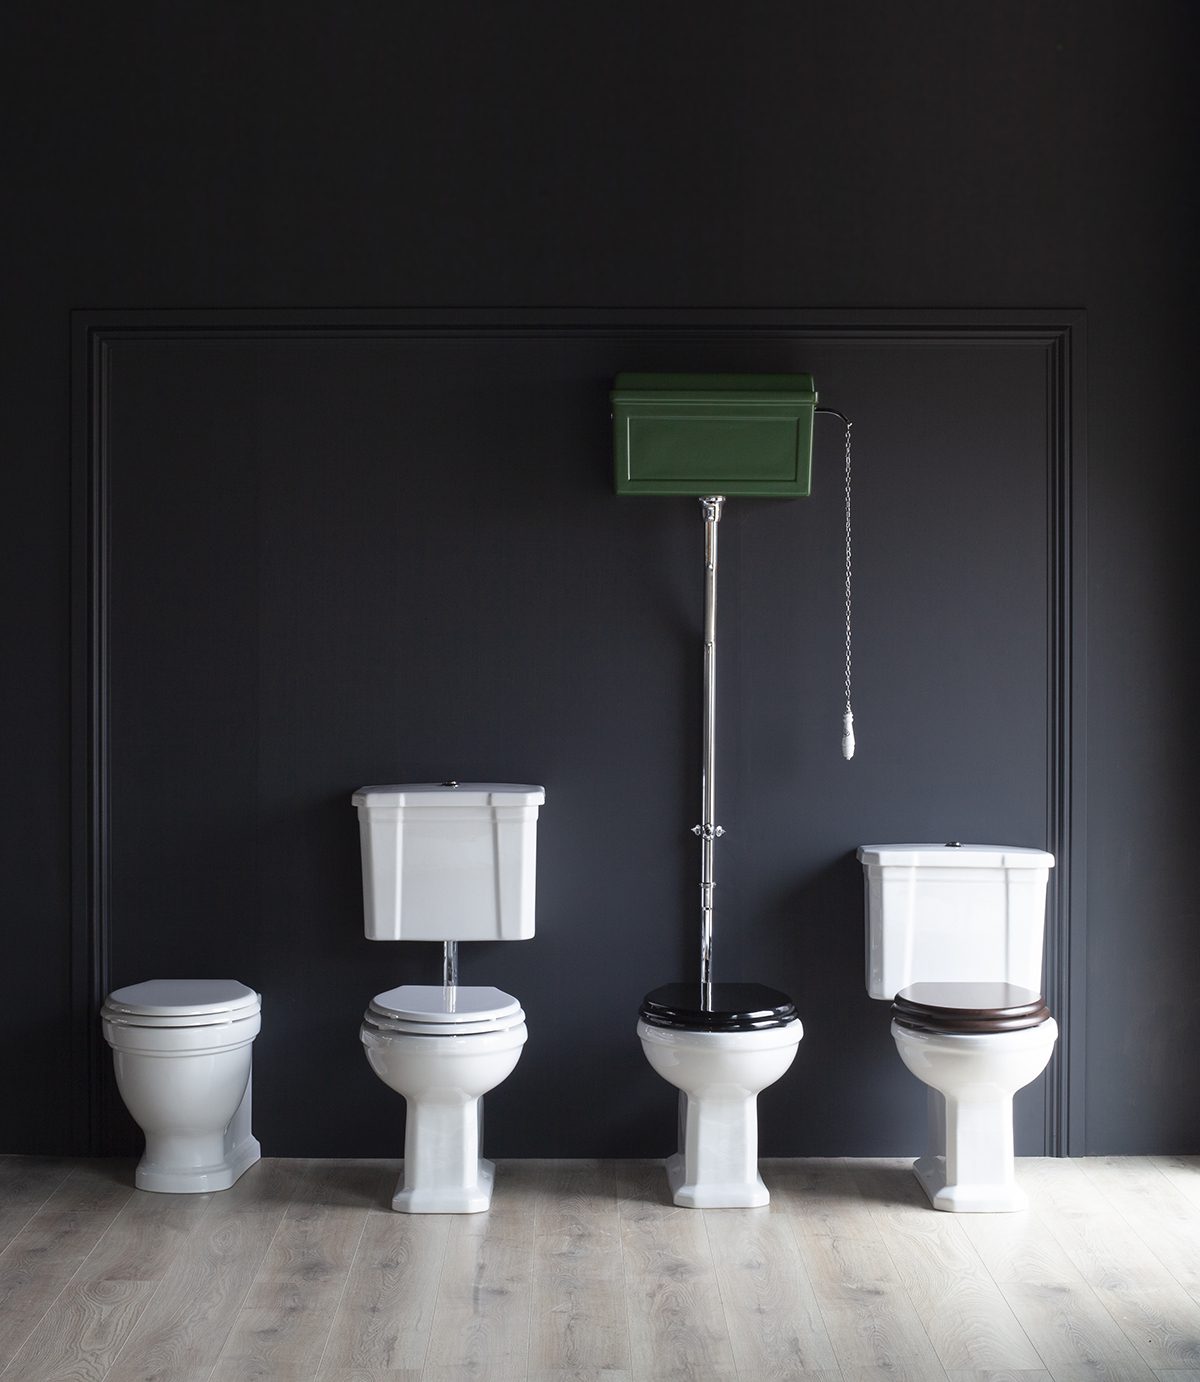 Albion's range of different toilet formats. Back to Wall, Low Level, High level and Close Coupled toilets.